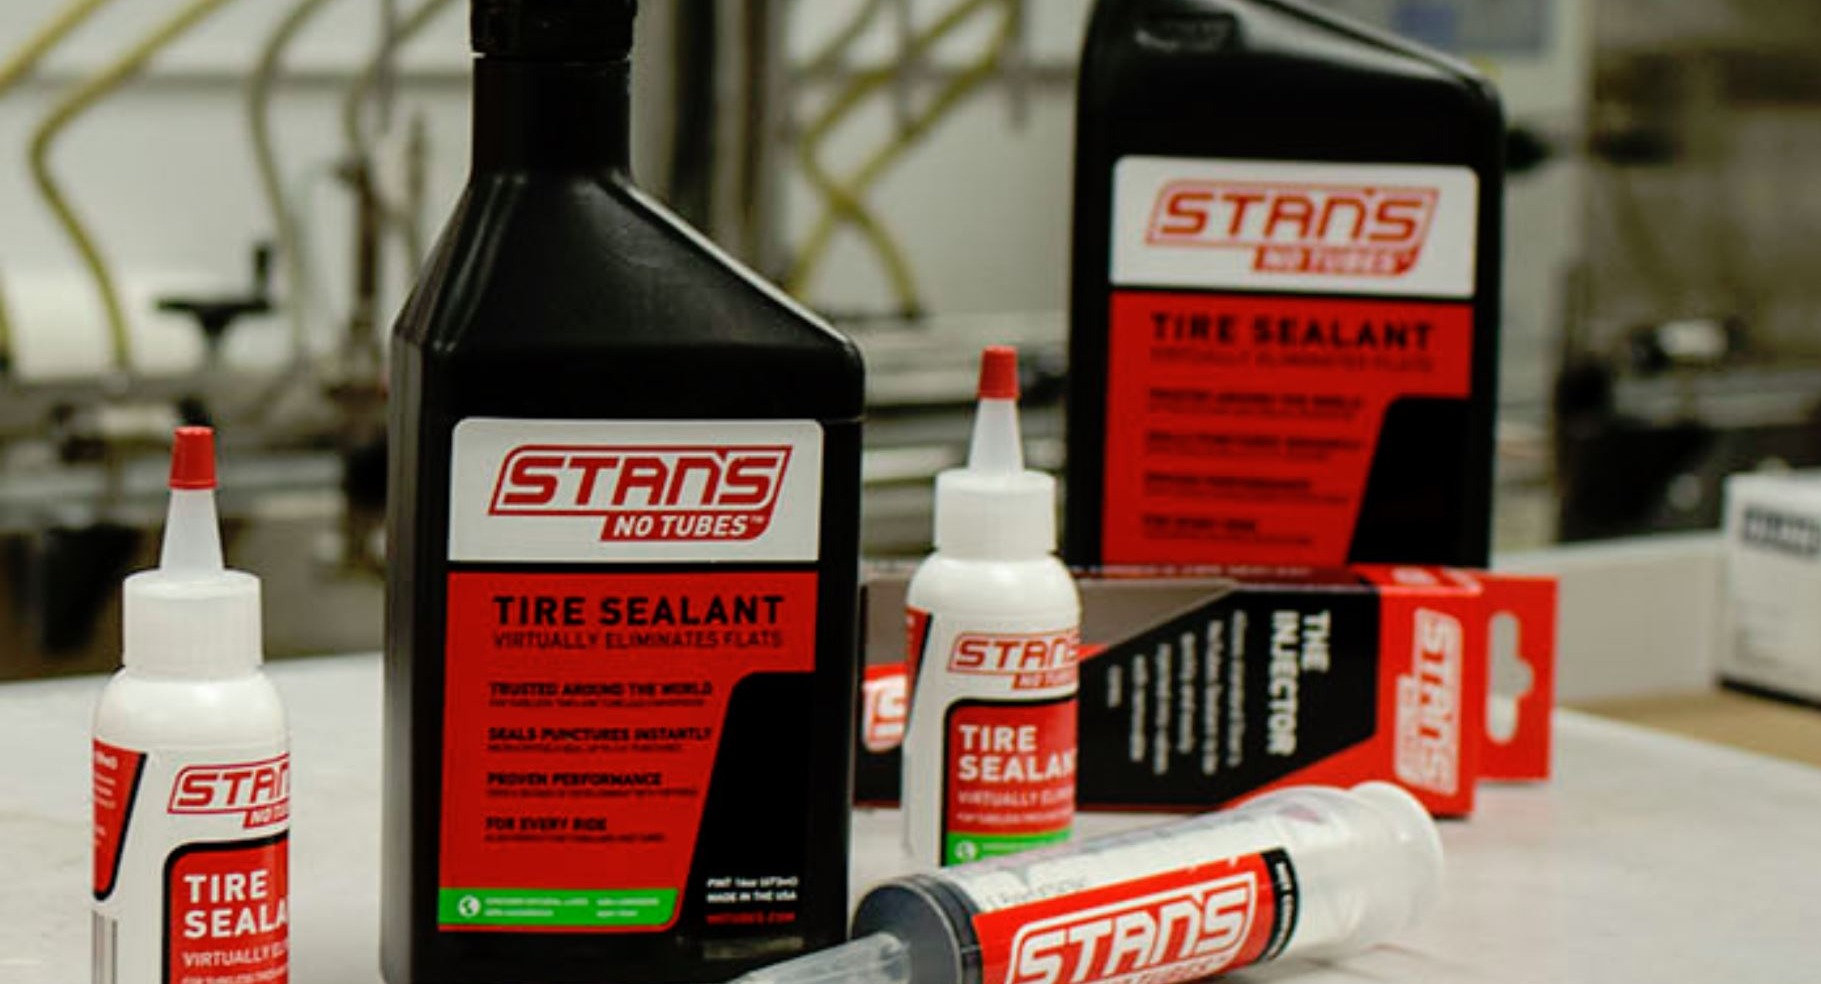 Stans is the most trusted name in tubeless technology